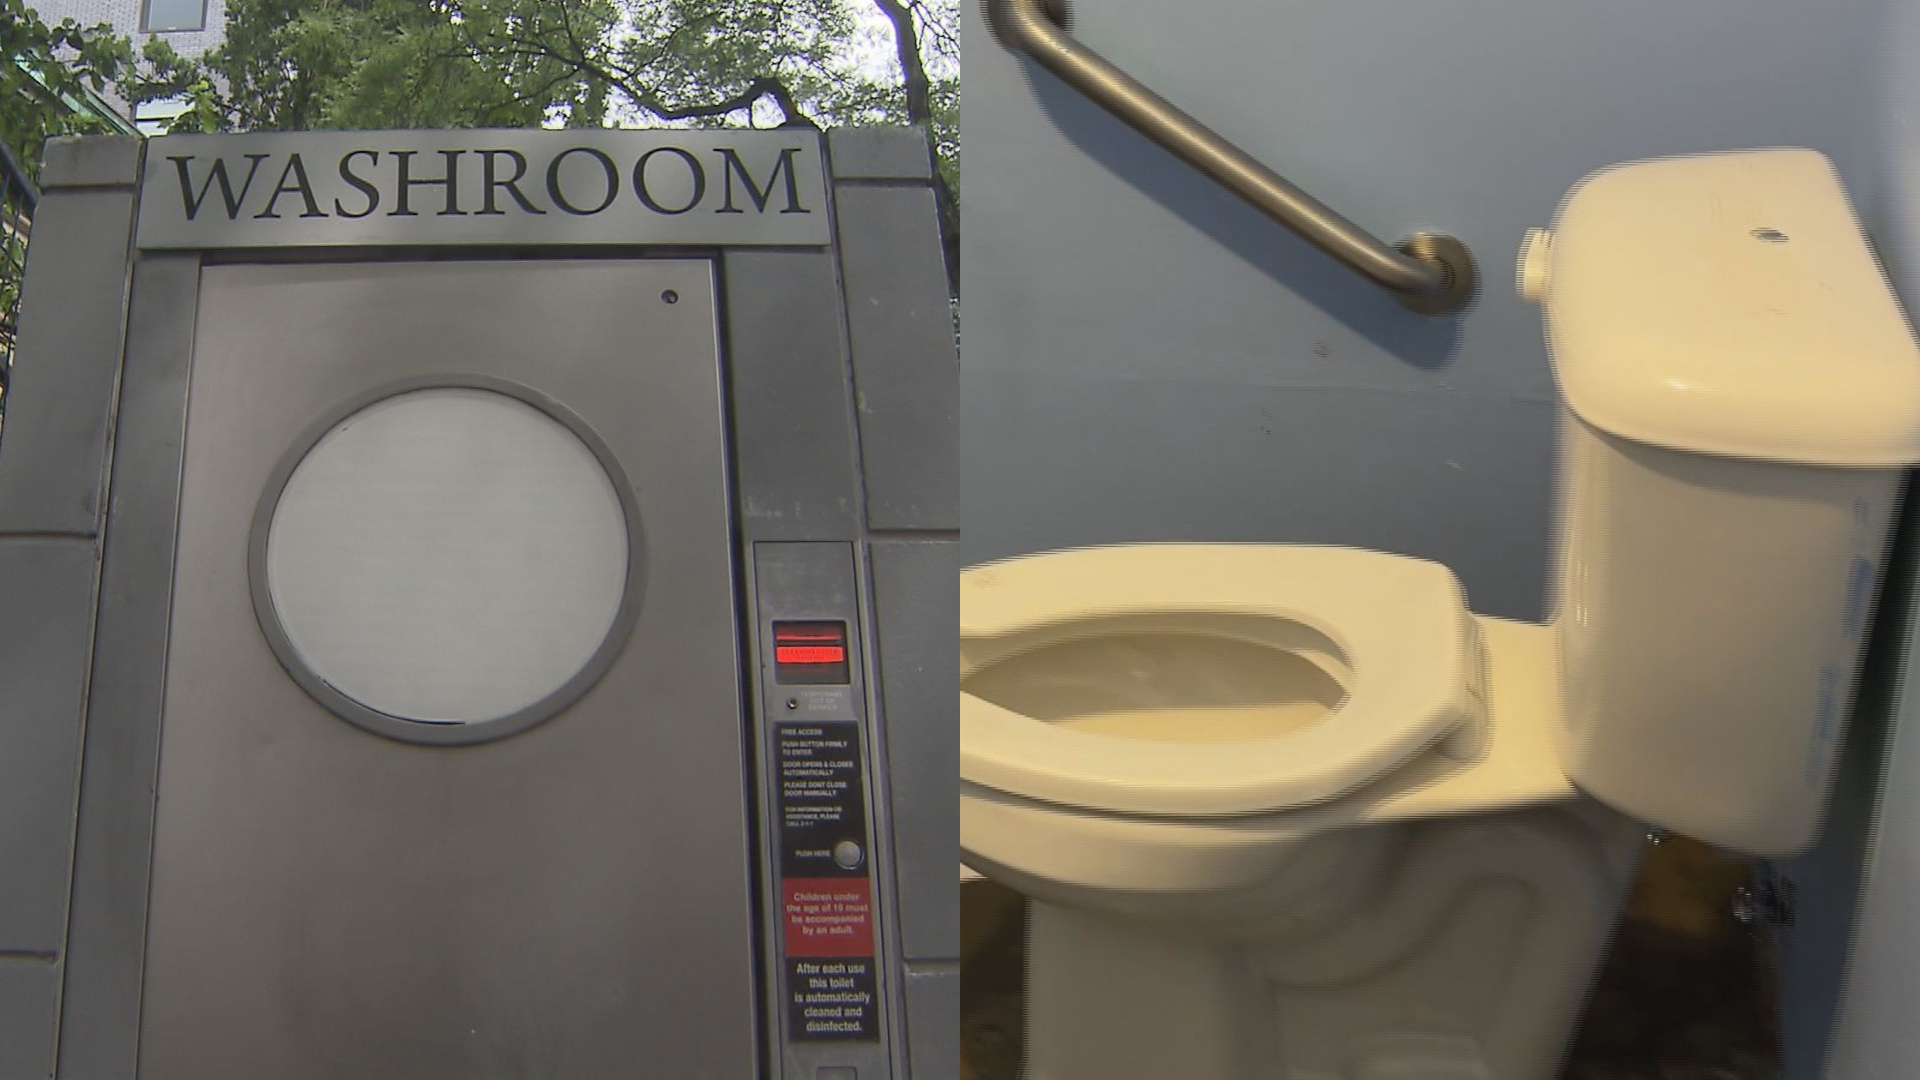 Two Downtown Eastside bathrooms at risk of closing due to lack of funding